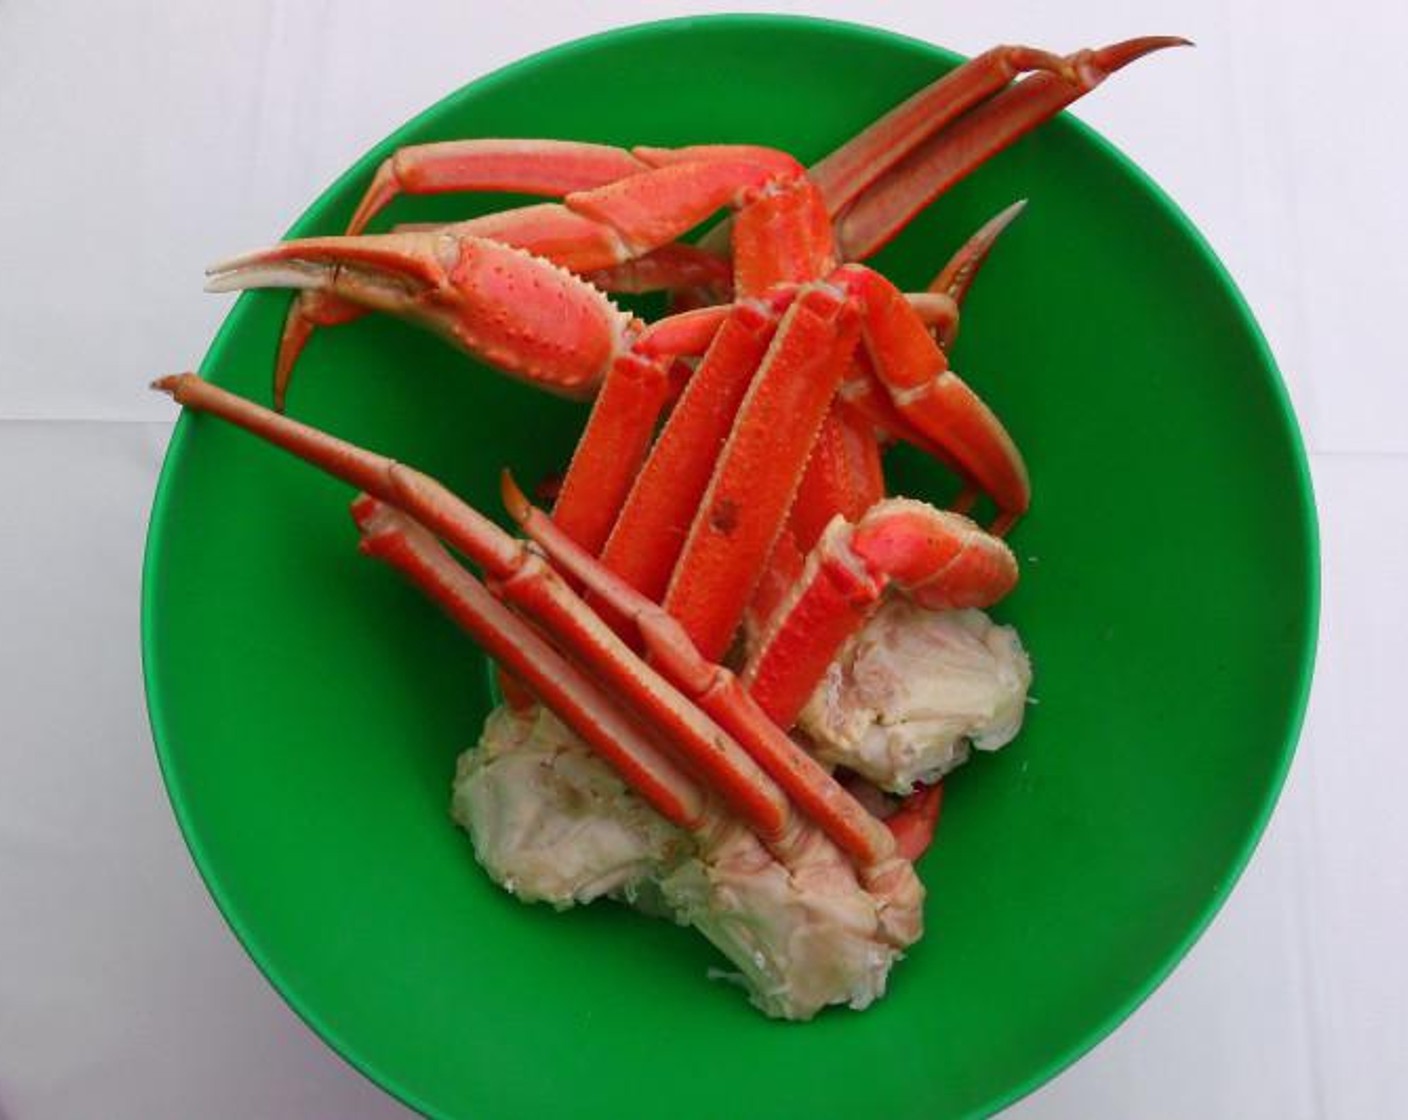 step 1 For 1 portion, remove meat from Snow Crab Legs (1 lb), reserve 2 opened claws and 2 opened leg joints.